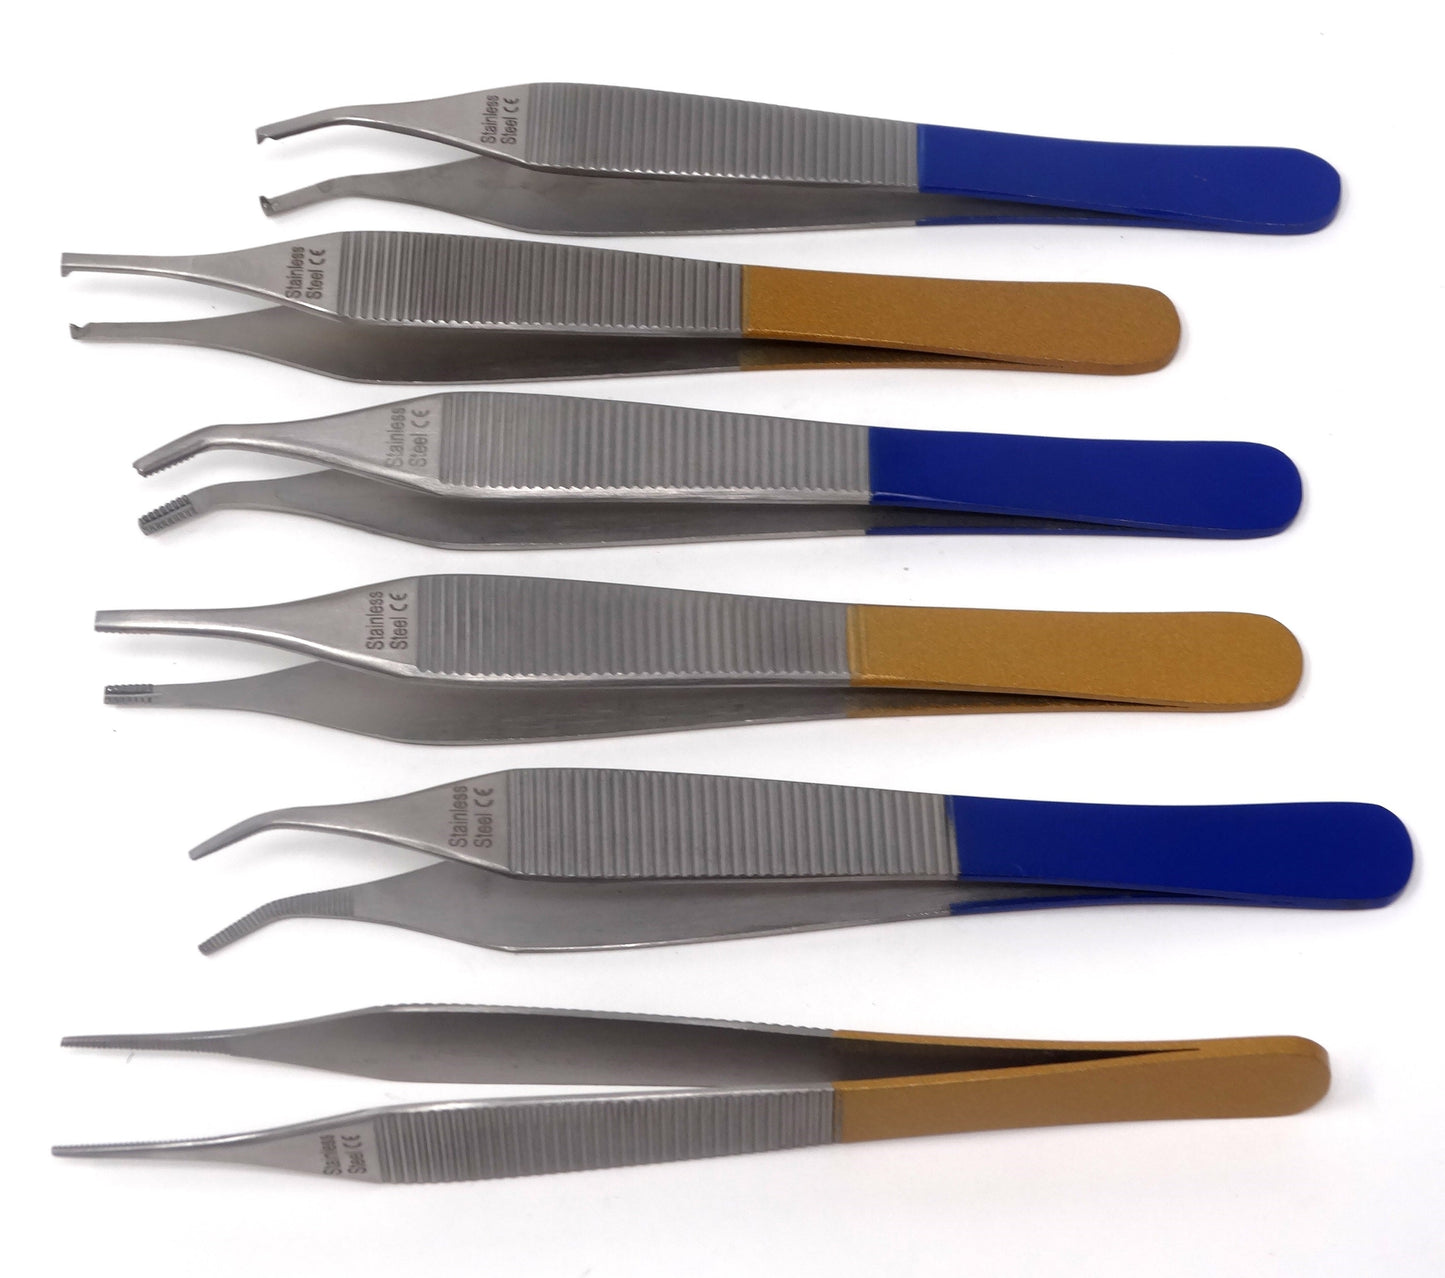 Set of 6 Adson Forceps Stainless Steel 4.75" Straight + Angled Dissecting Tweezers, Color Coded